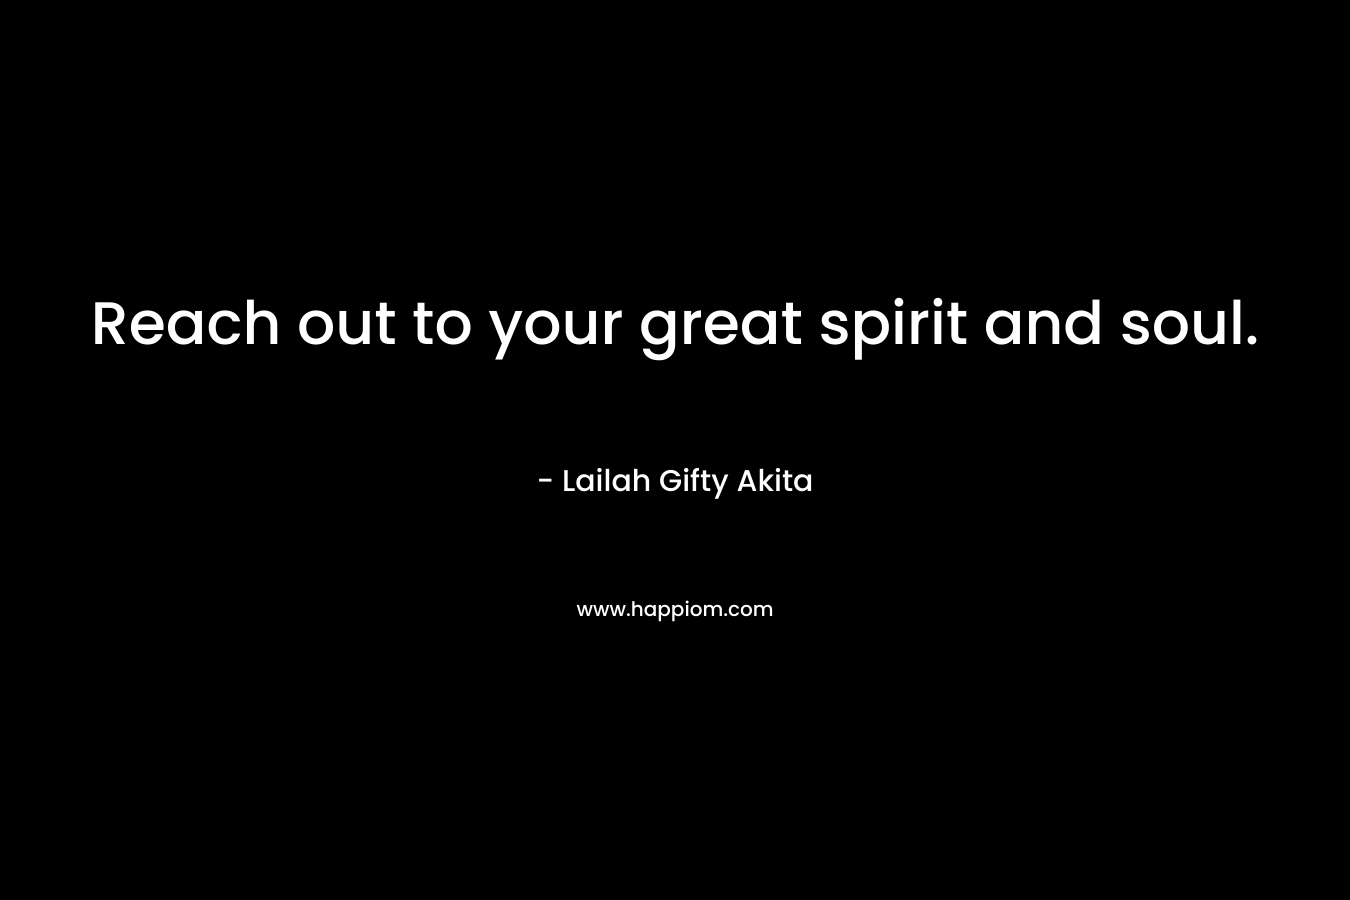 Reach out to your great spirit and soul.